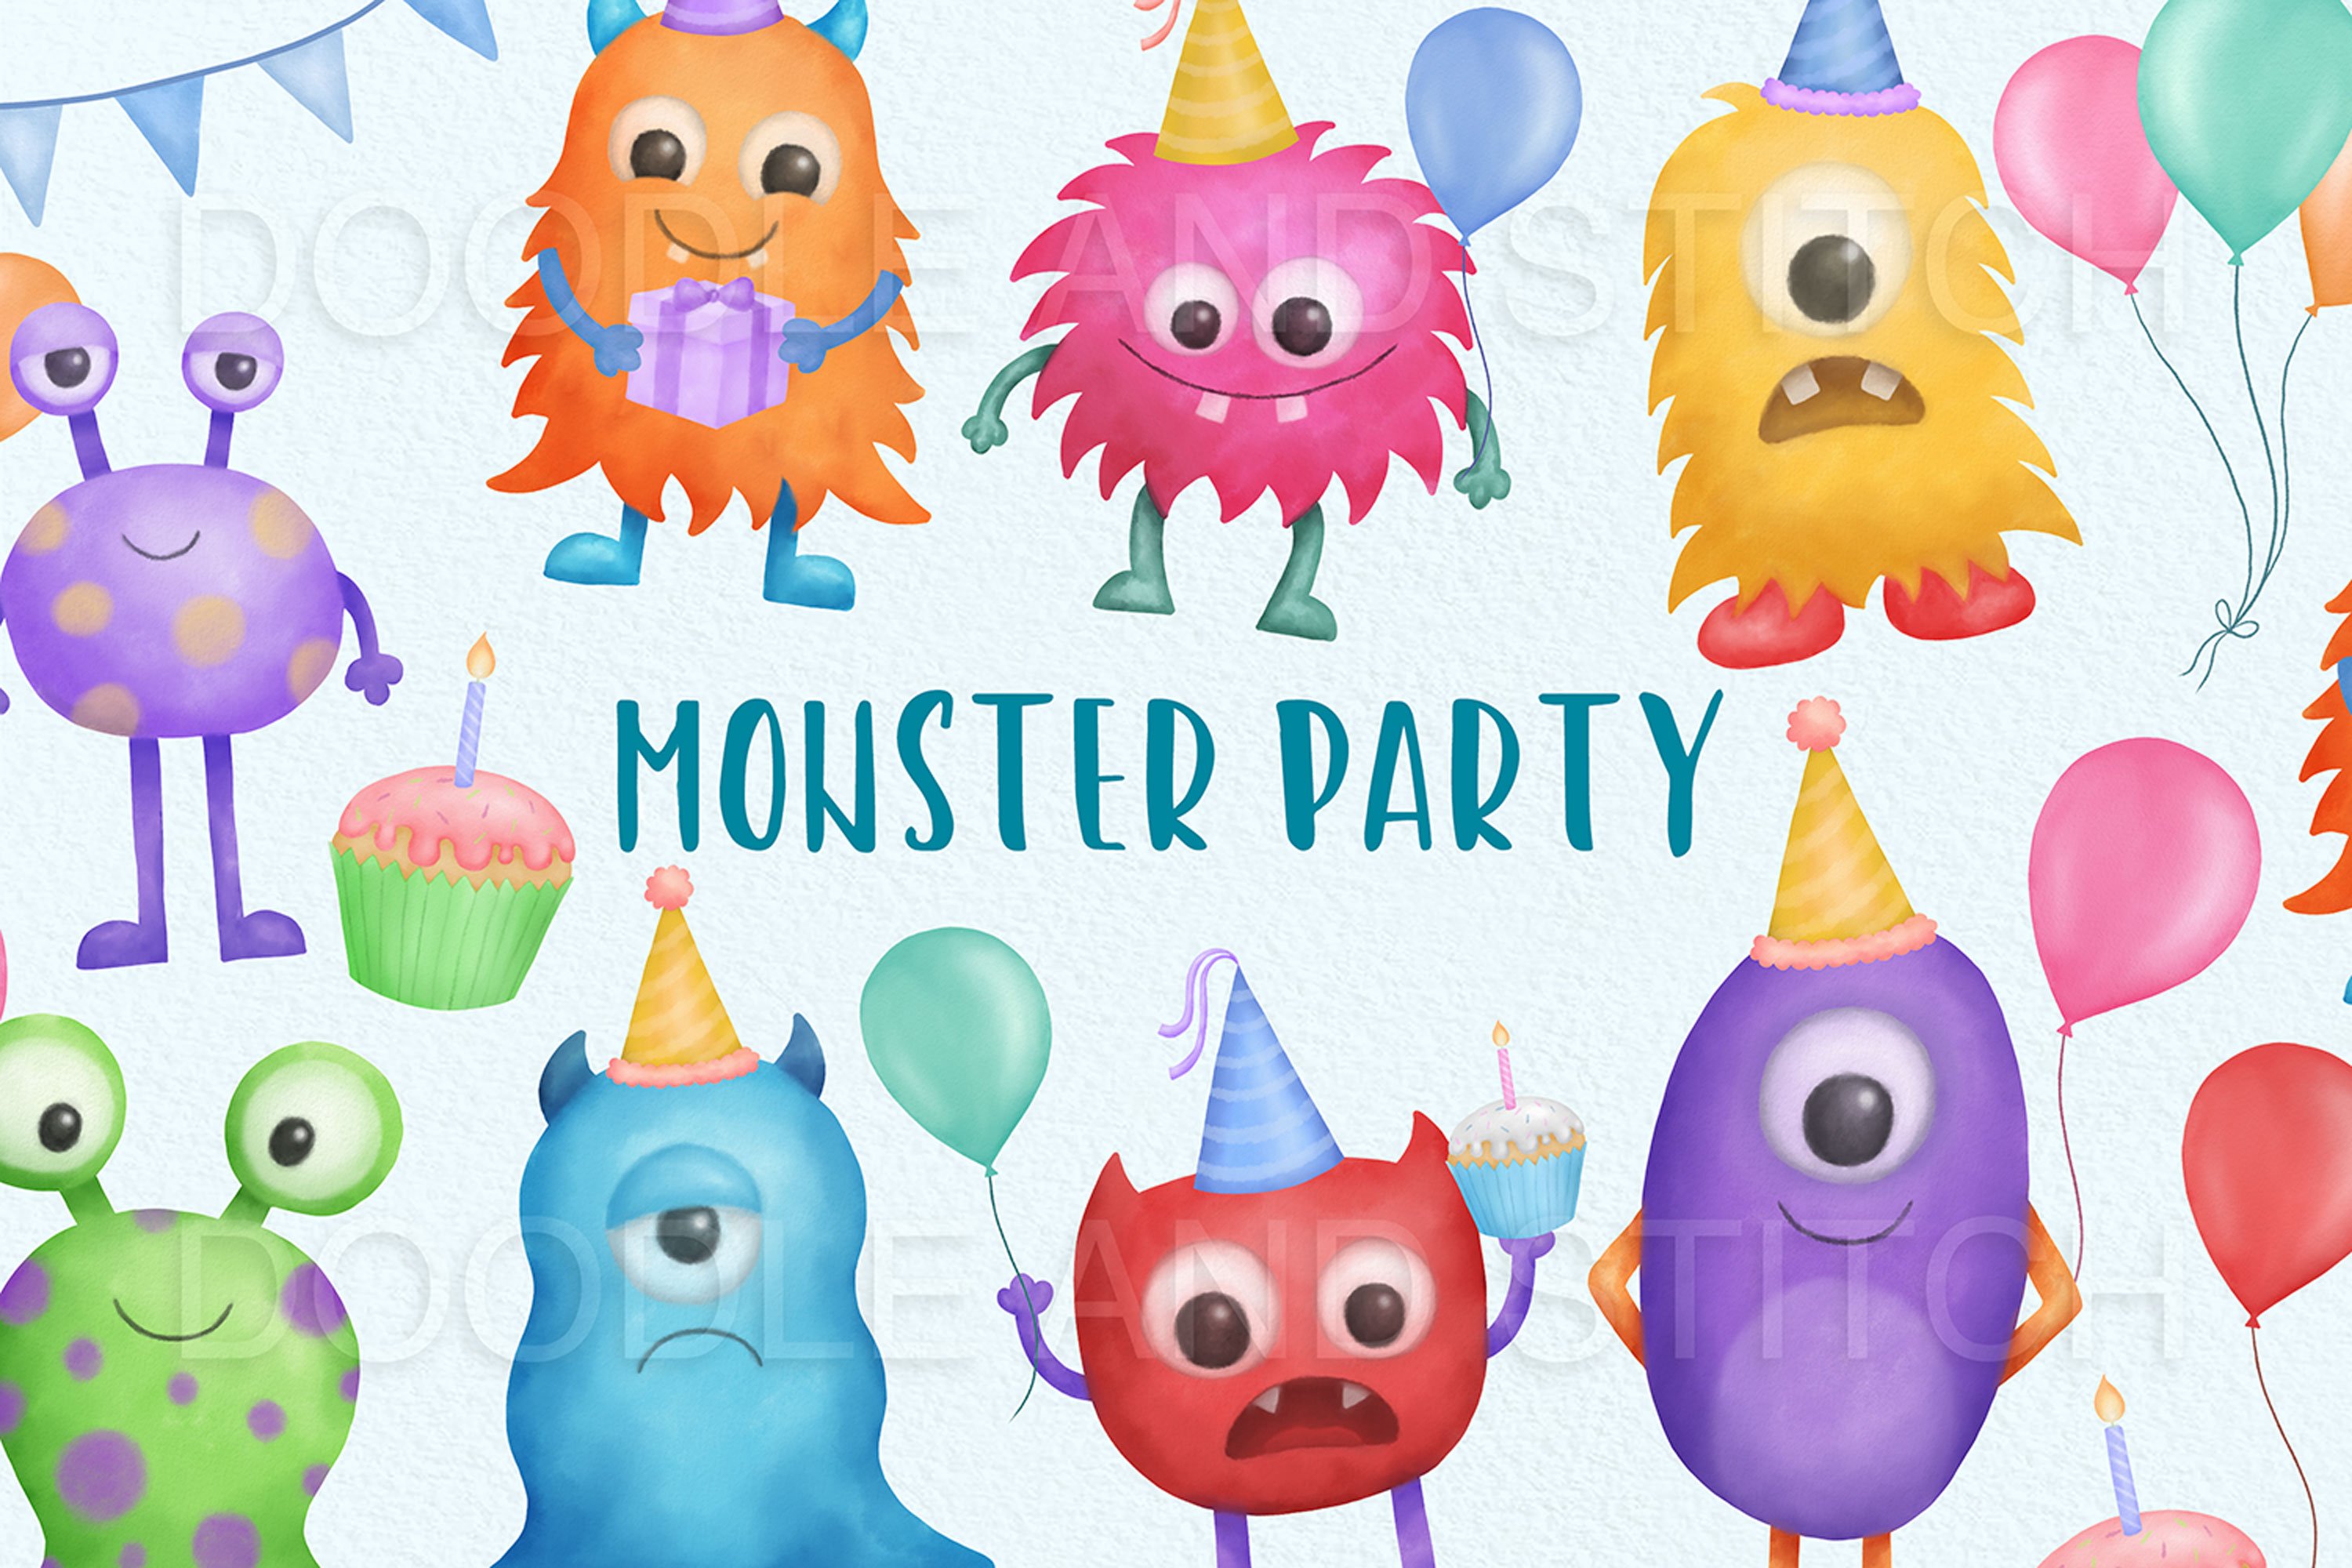 Monster Party Watercolor Clipart cover image.